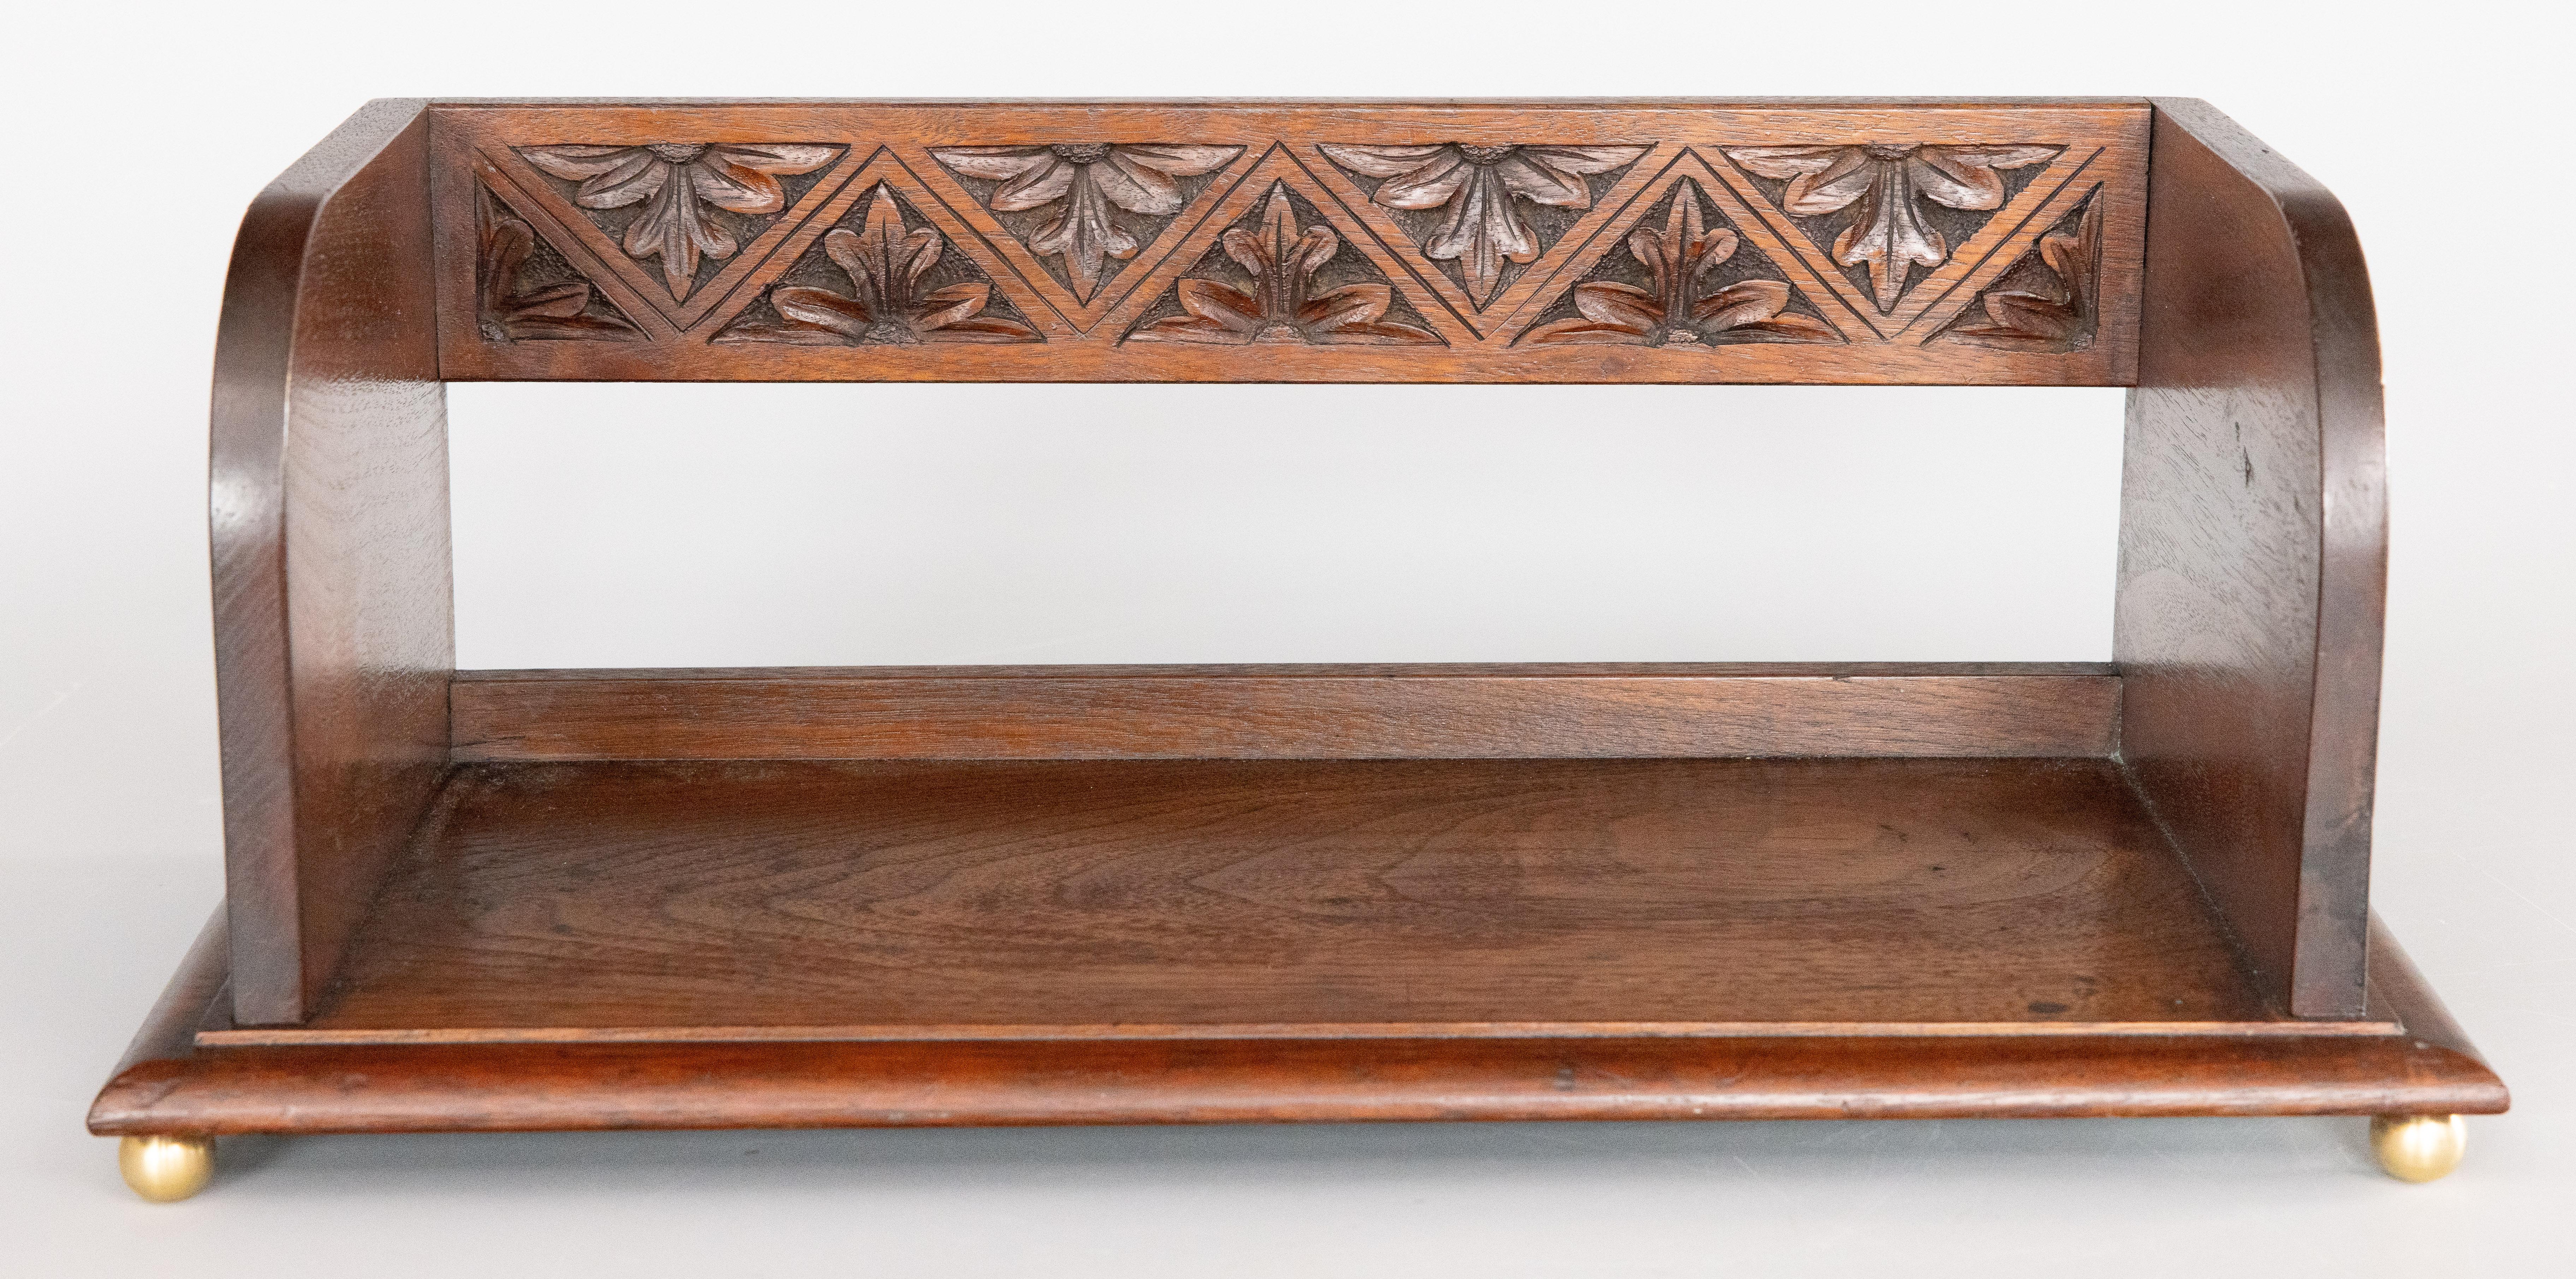 A fine antique early 20th Century English mahogany carved book trough / book rack / book stand. This beautiful table top book stand is well made with hand carved floral designs and brass ball feet. It would make a handsome addition to a desktop or